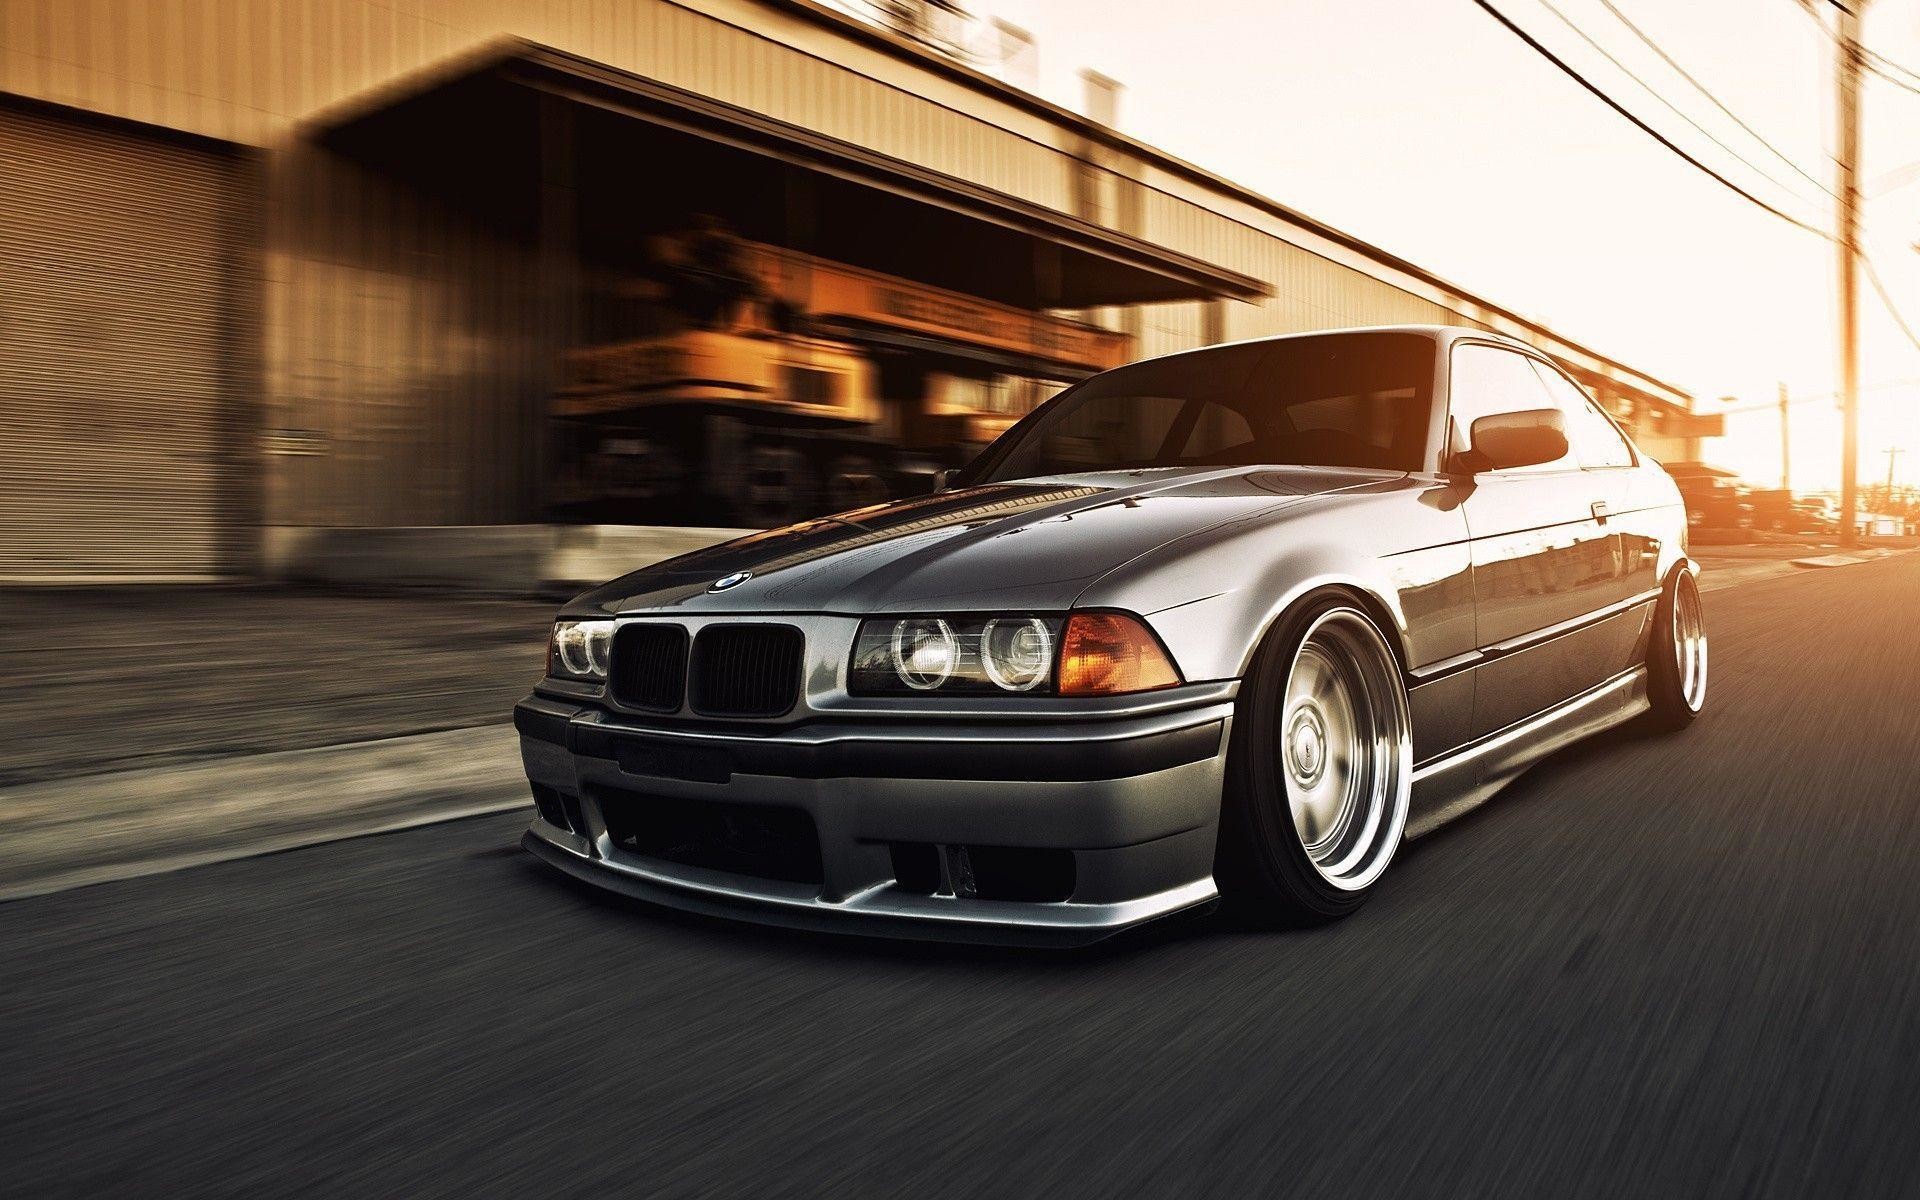 Free download BMW E36 Wallpaper 61 images [1920x1200] for